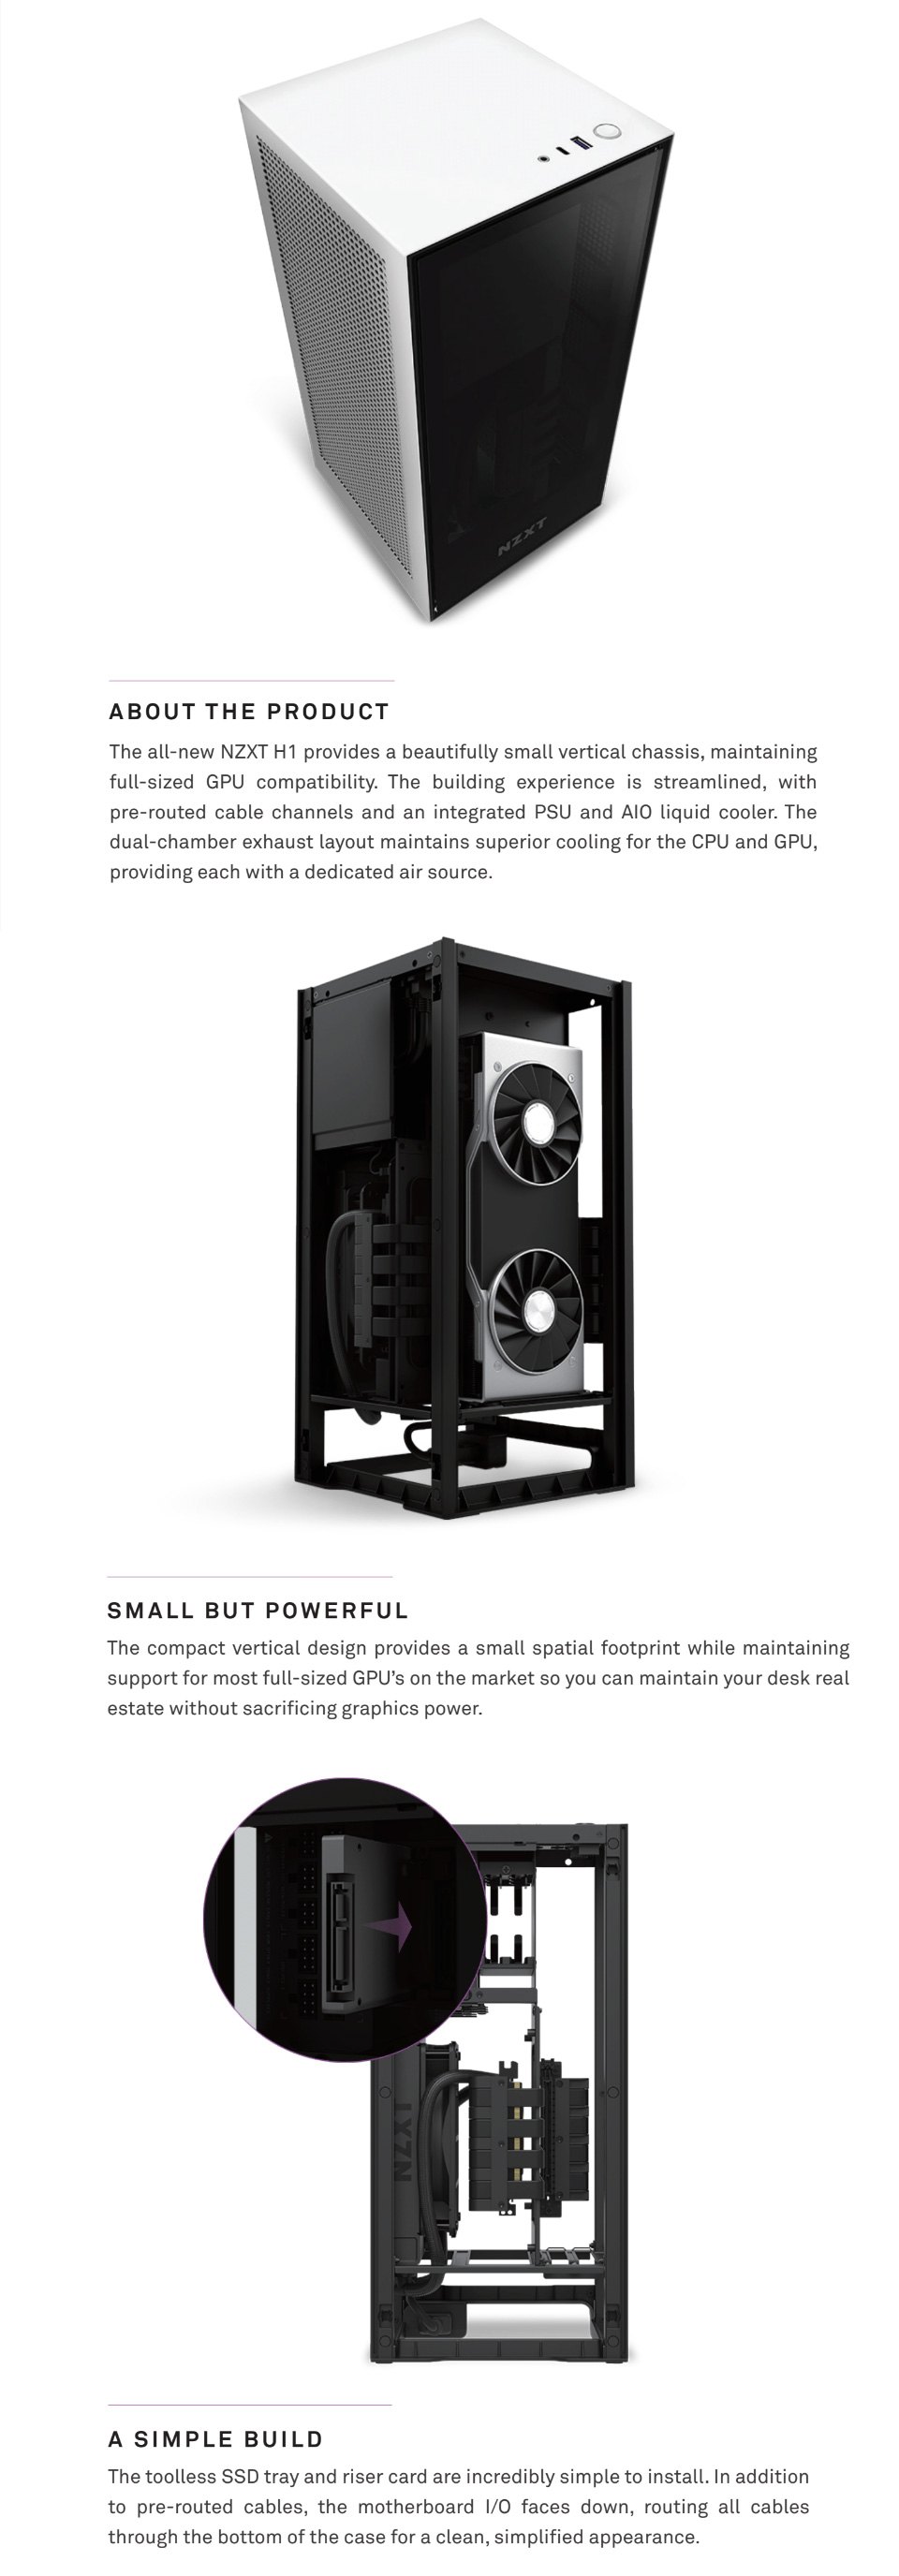 NZXT H1 Liquid Cooled ITX Case with 650W Gold PSU White features